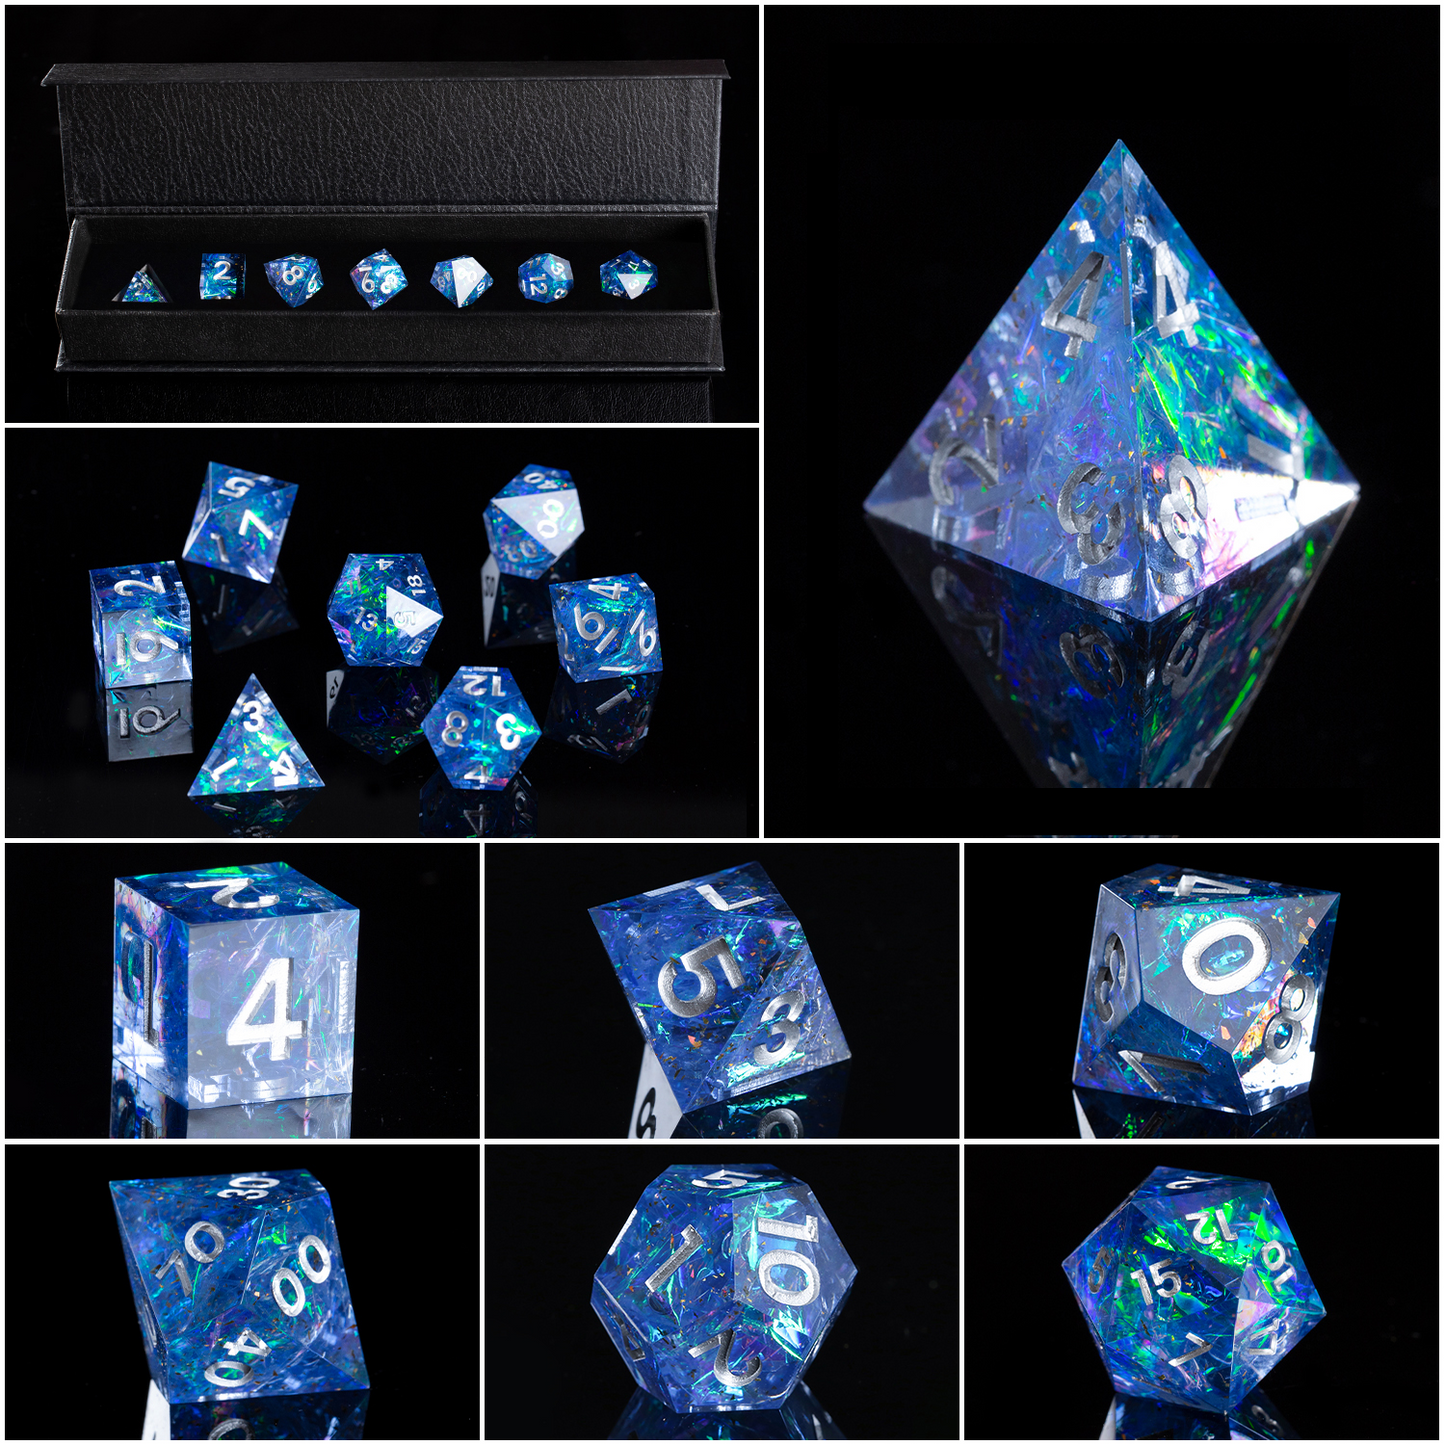 Aquamarine dice set highlighted in separate boxes for each die.